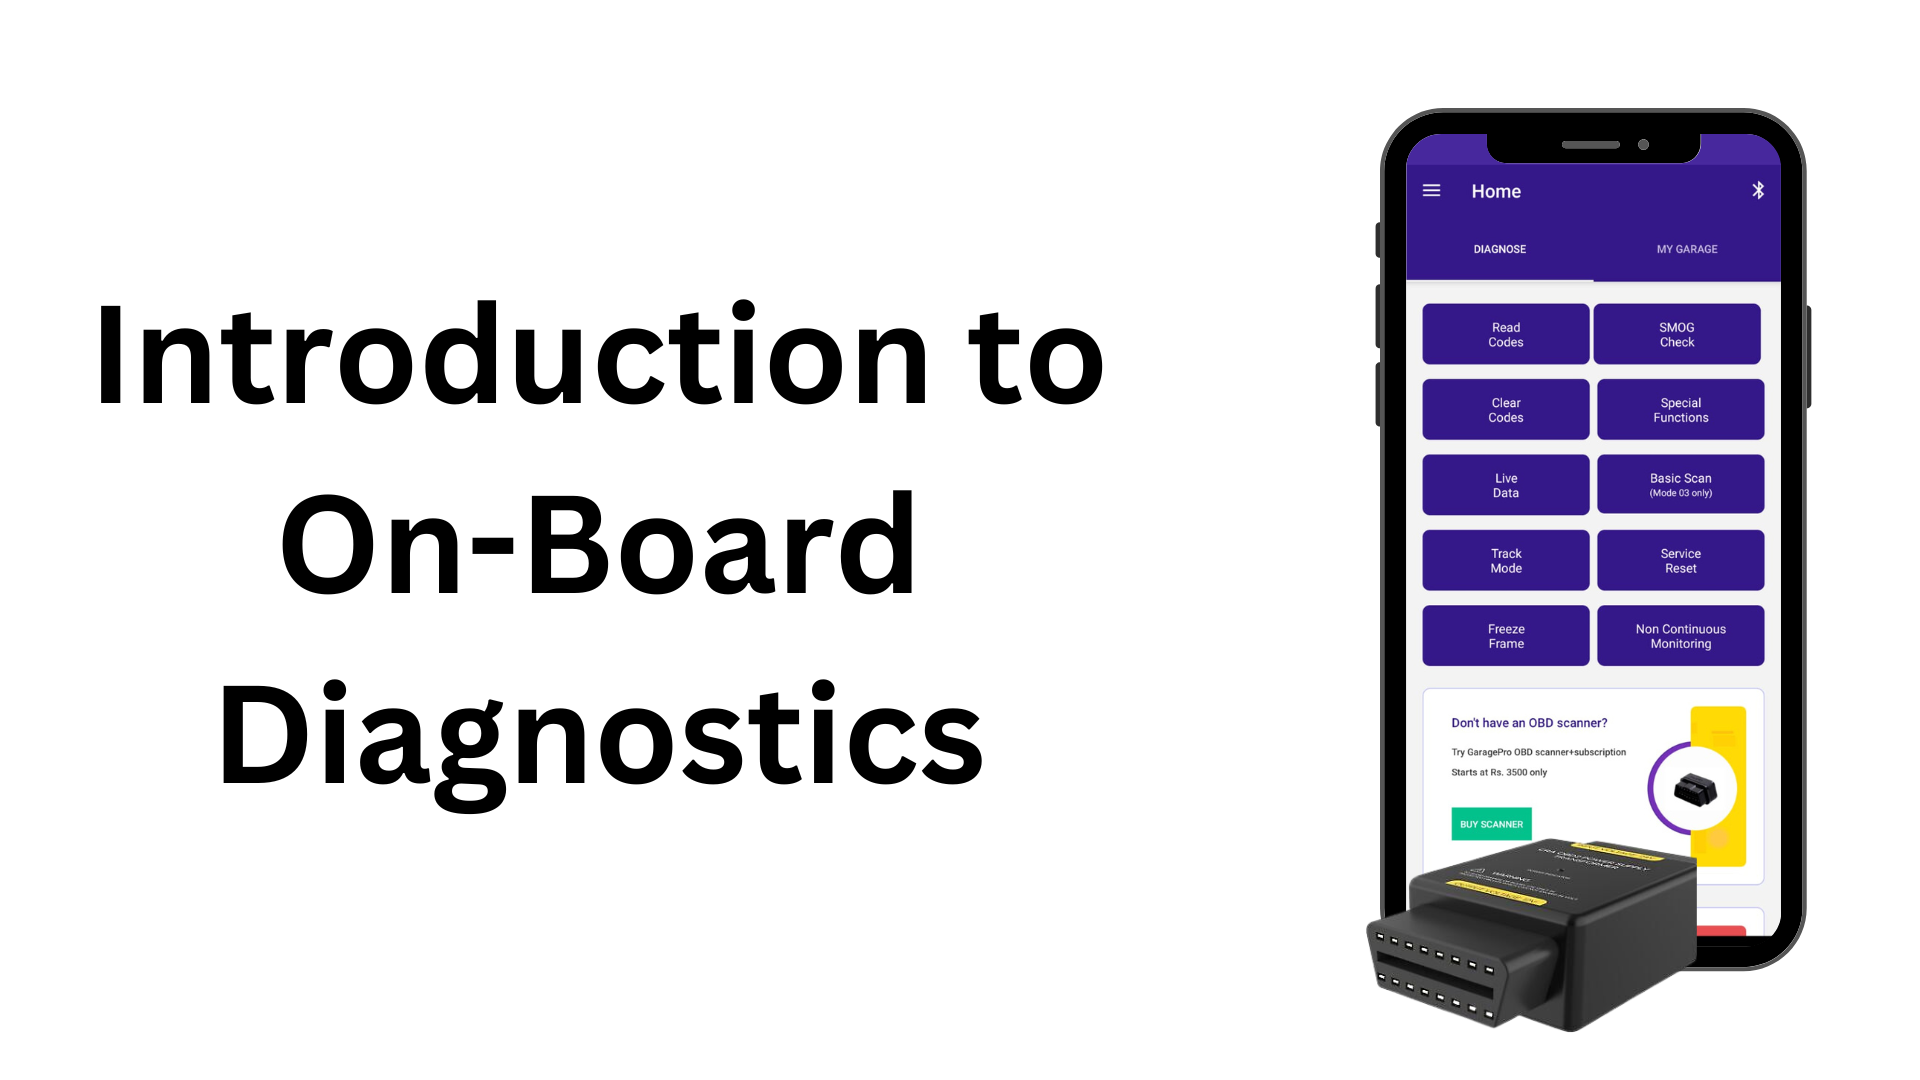 Introduction to On-Board Diagnostics